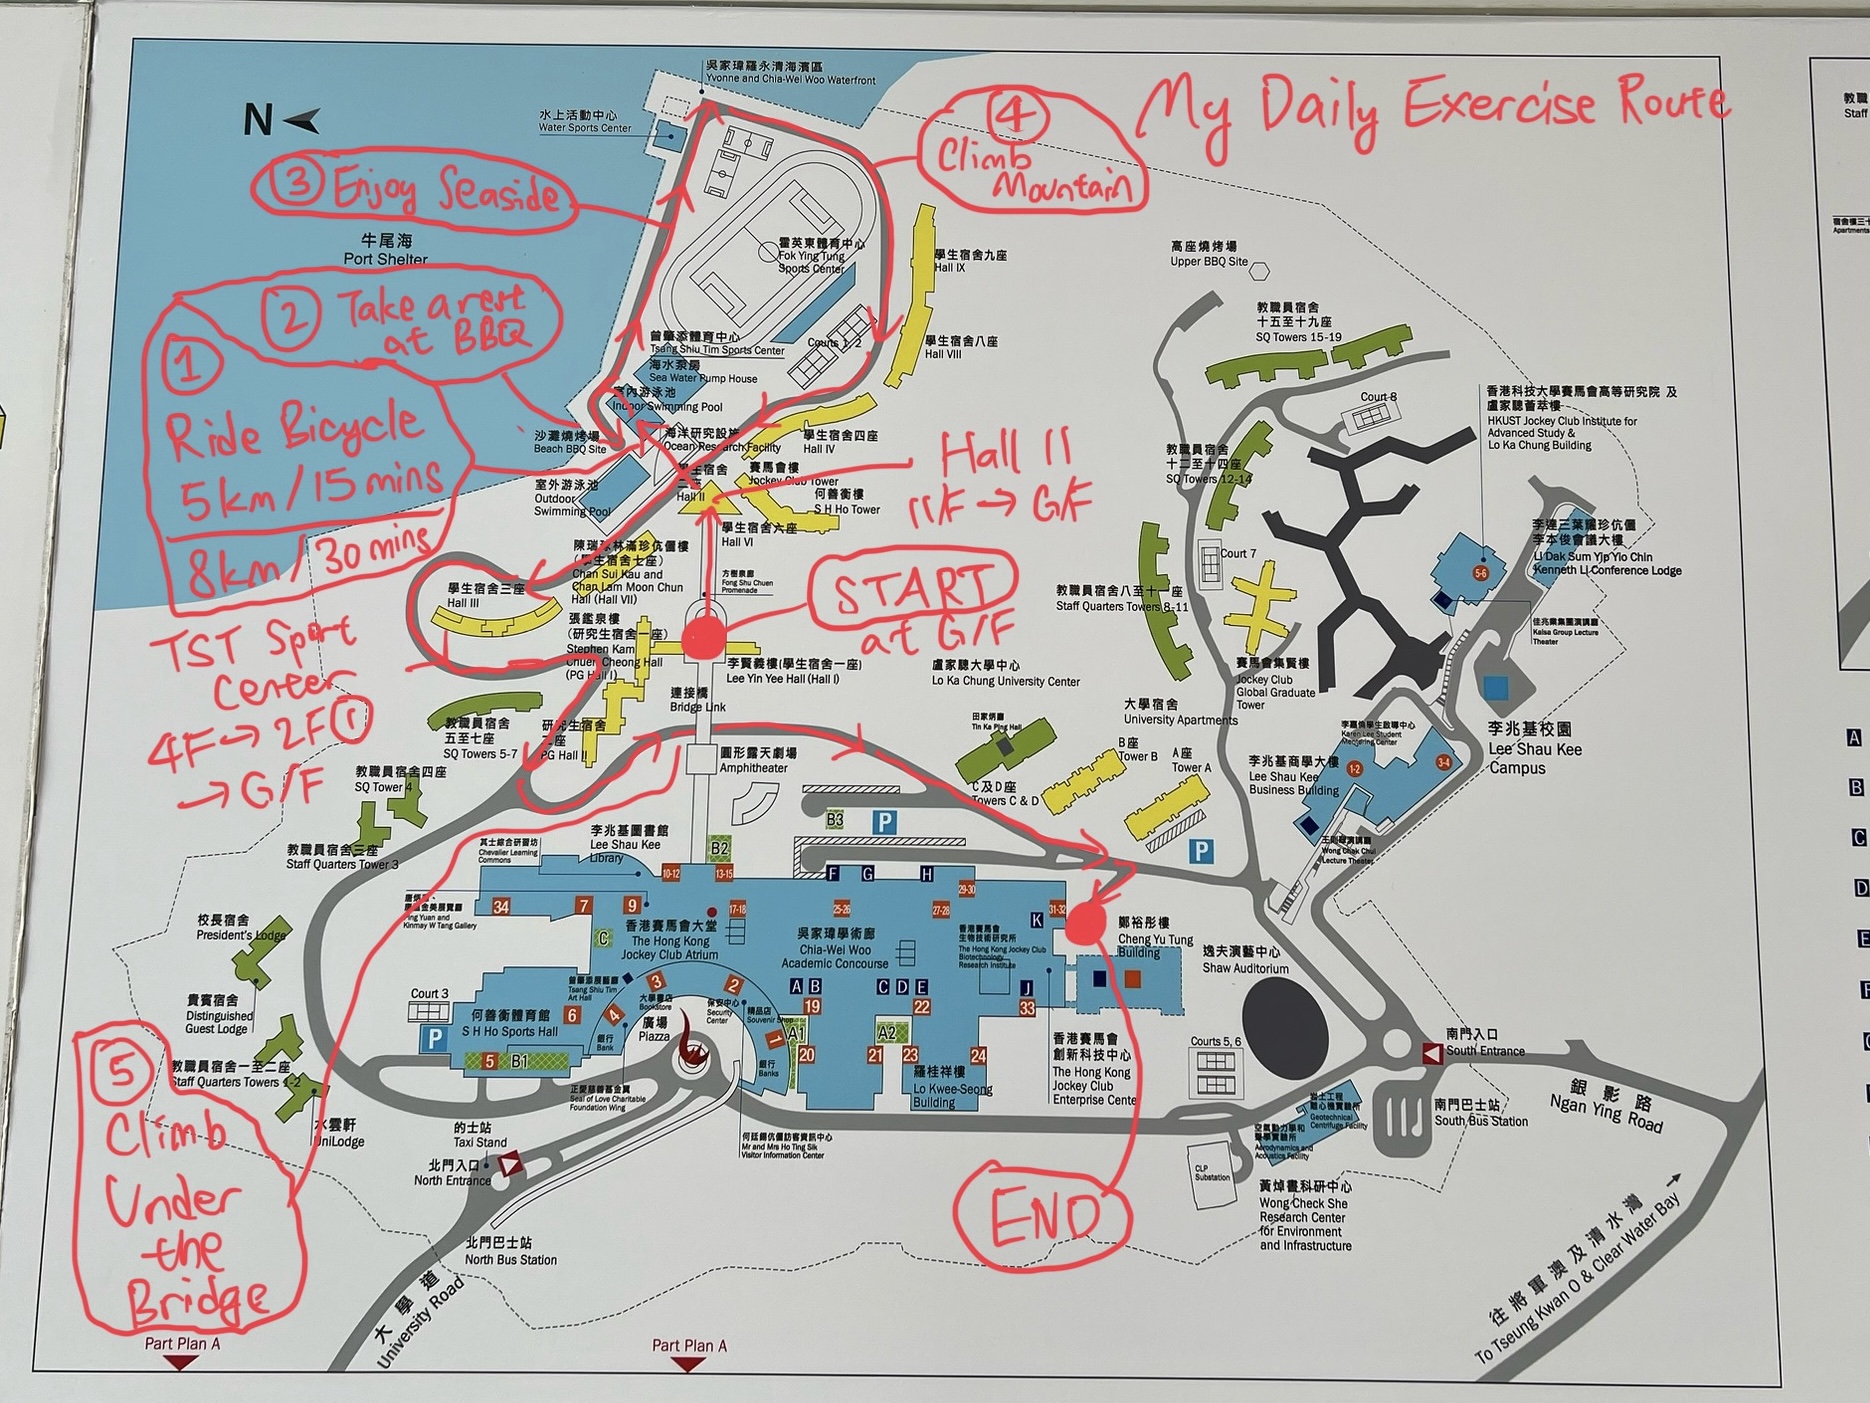 My Daily Exercise Route on HKUST Campus